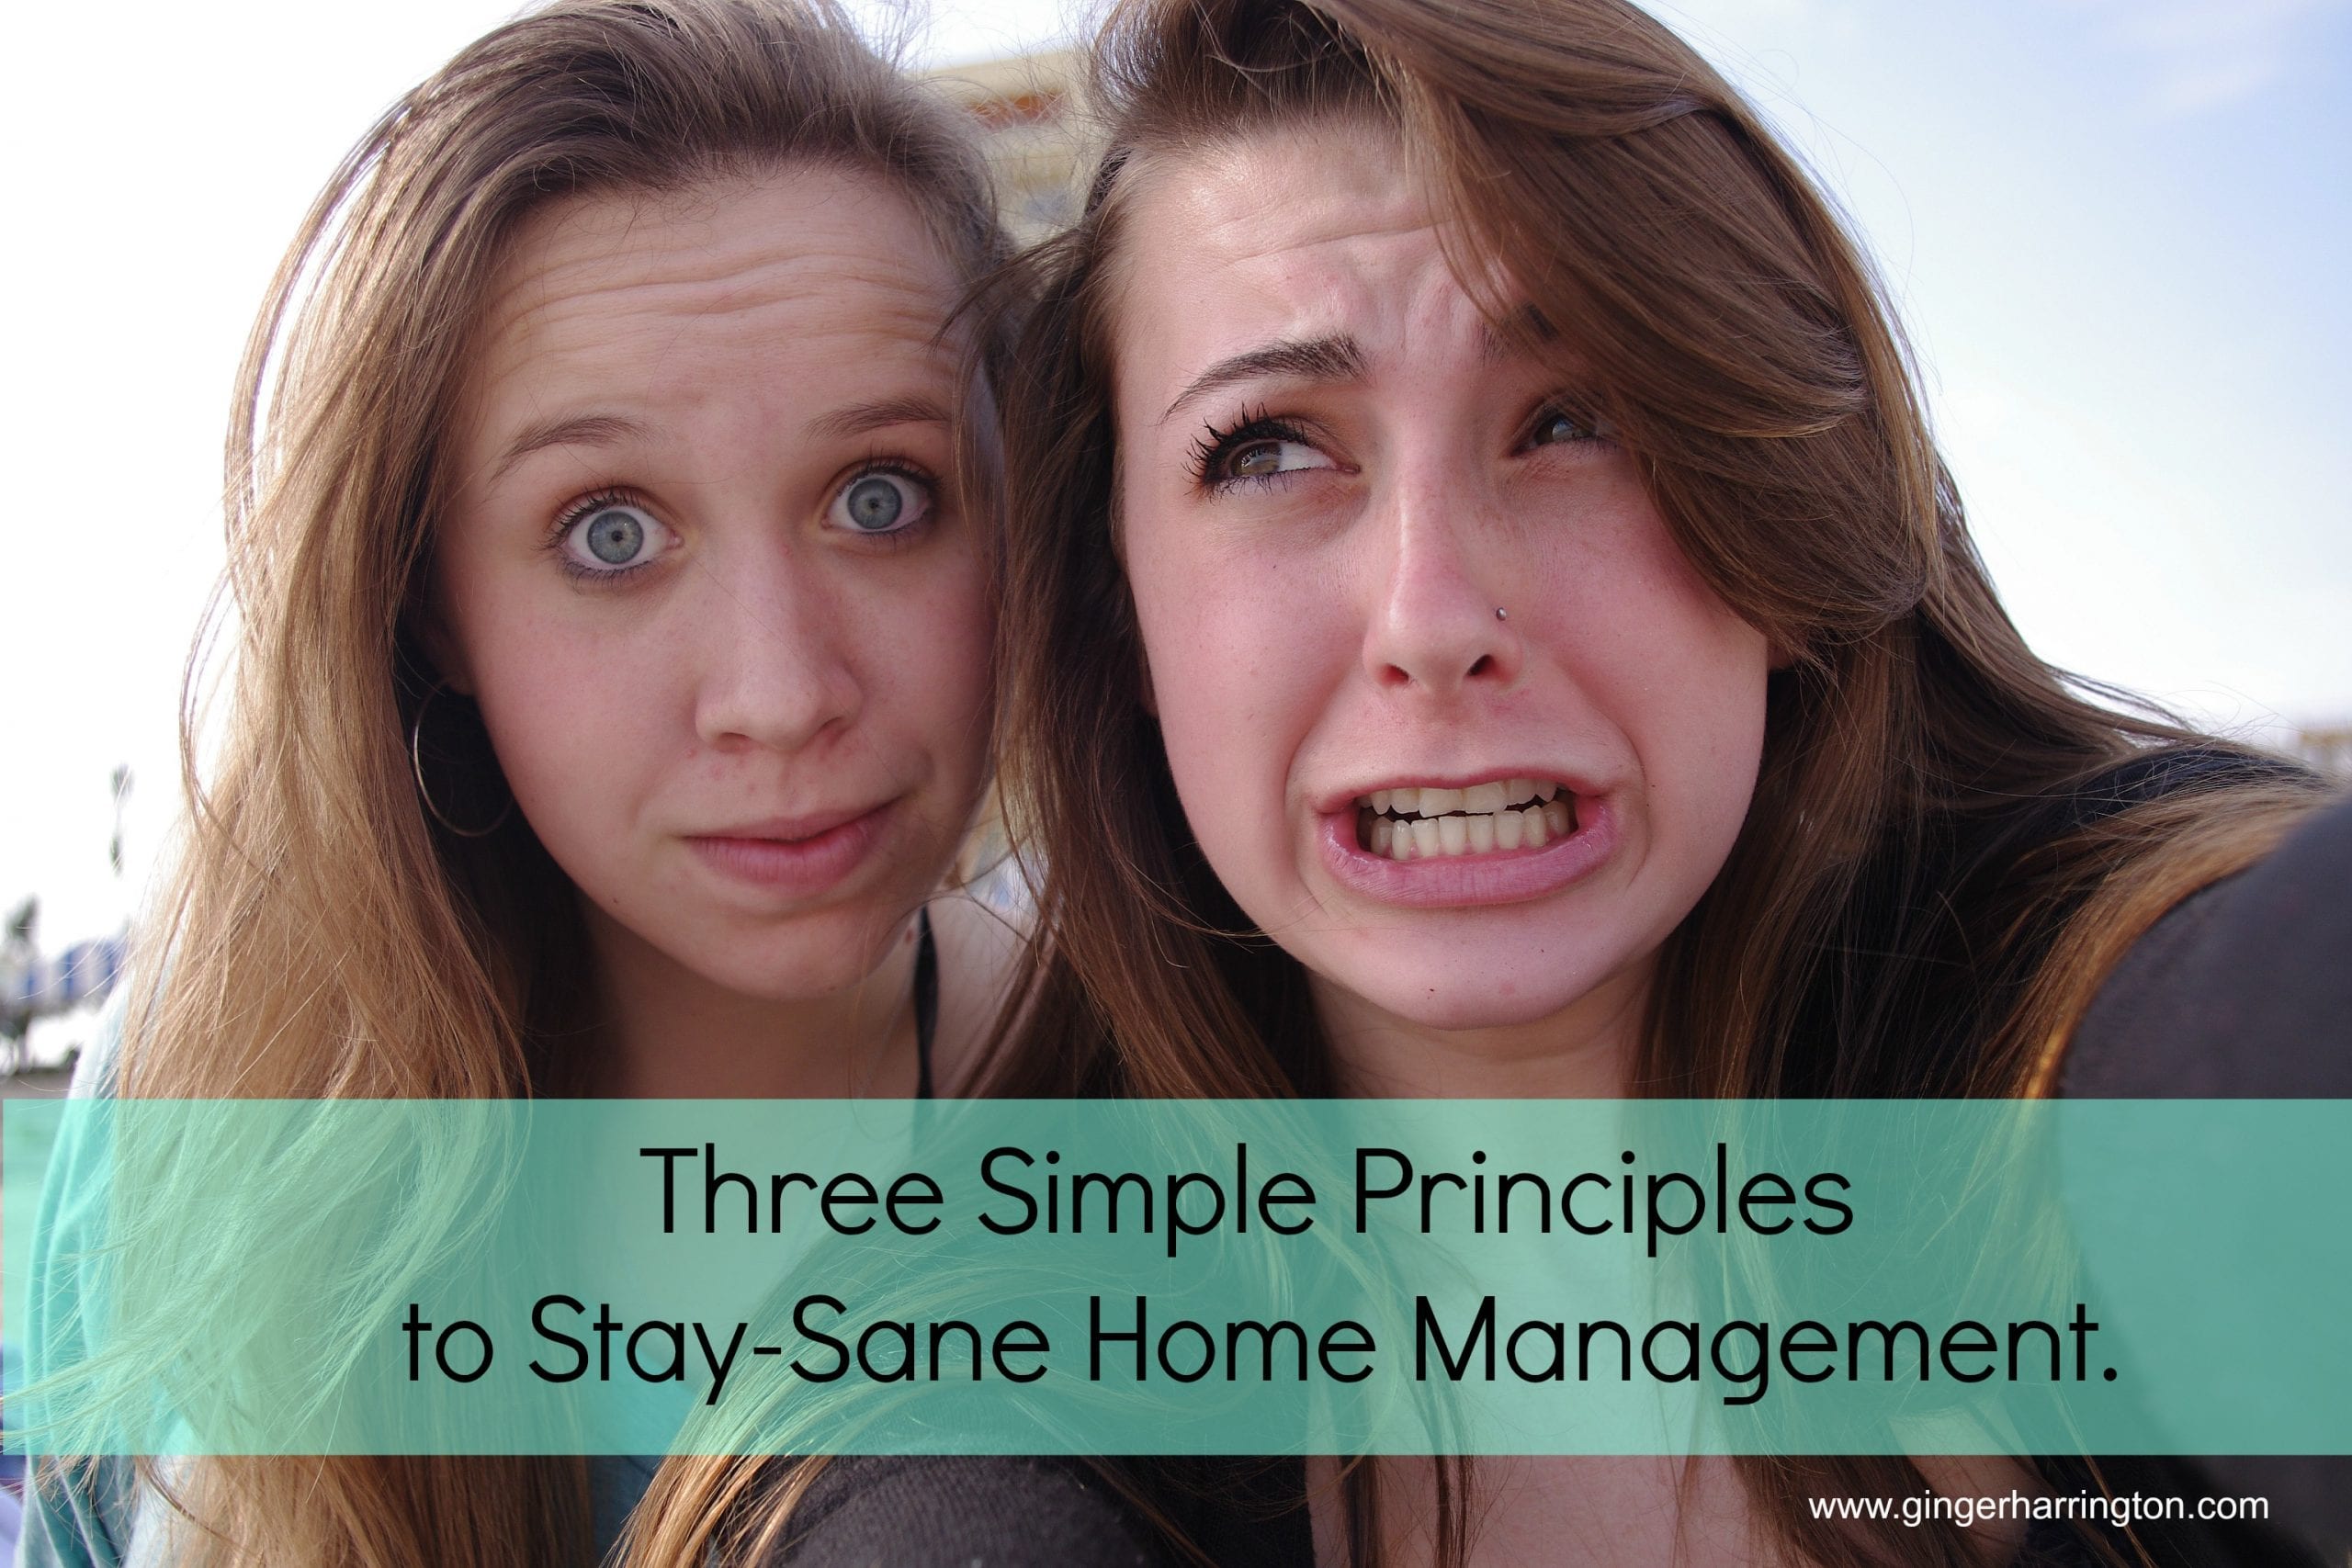 3 More Principles for Stay-Sane Home Management